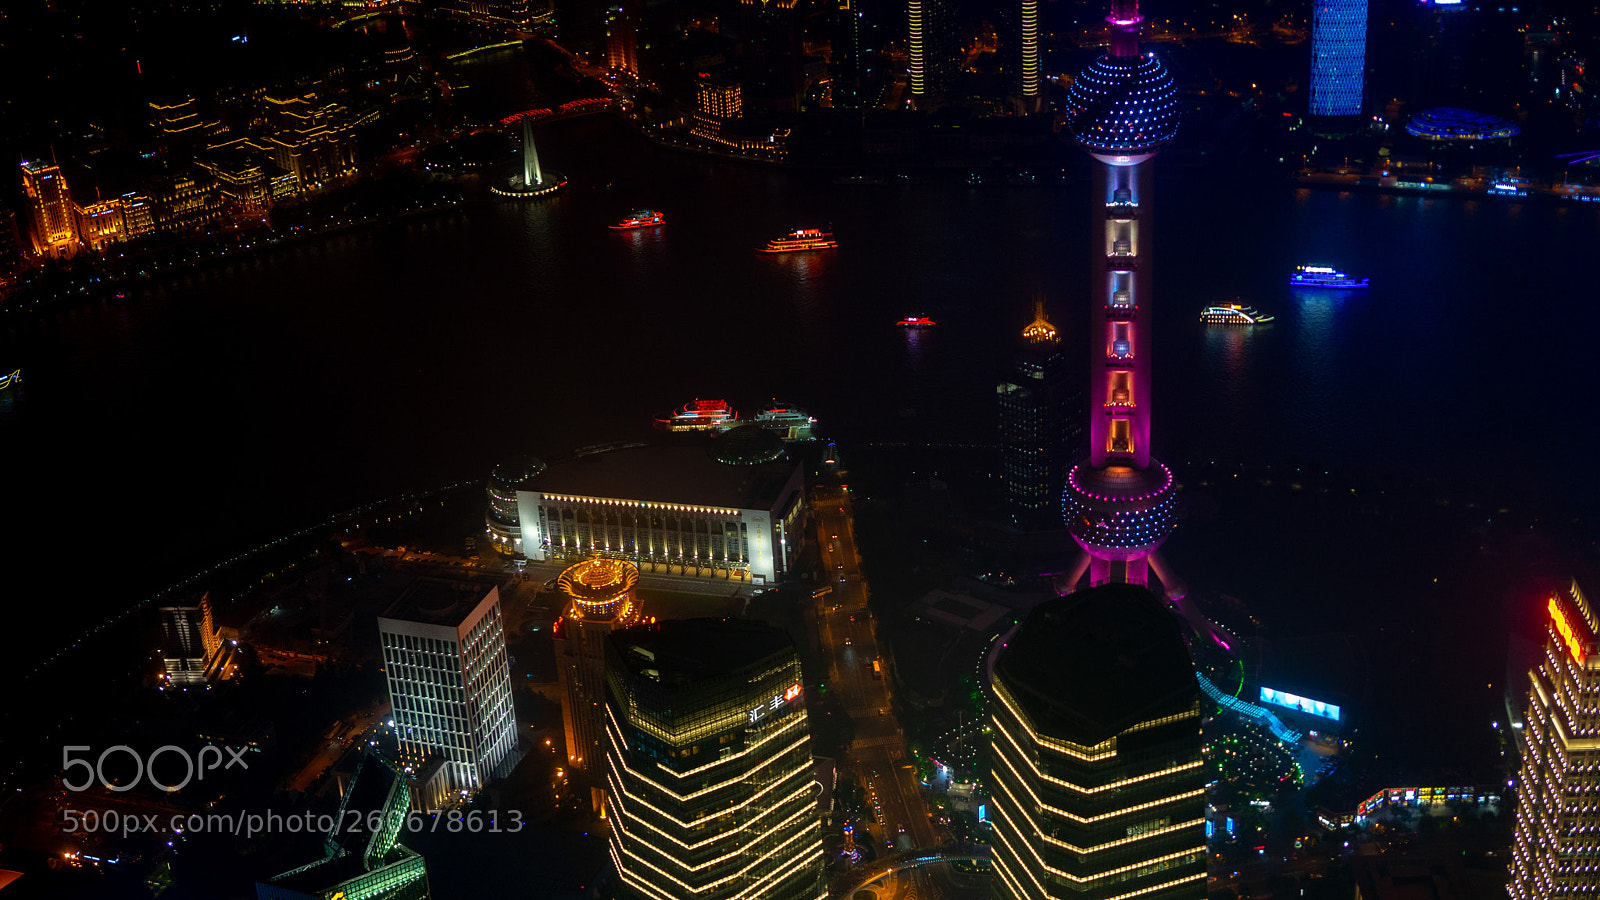 Sony a7 sample photo. From top of shanghai #2 photography